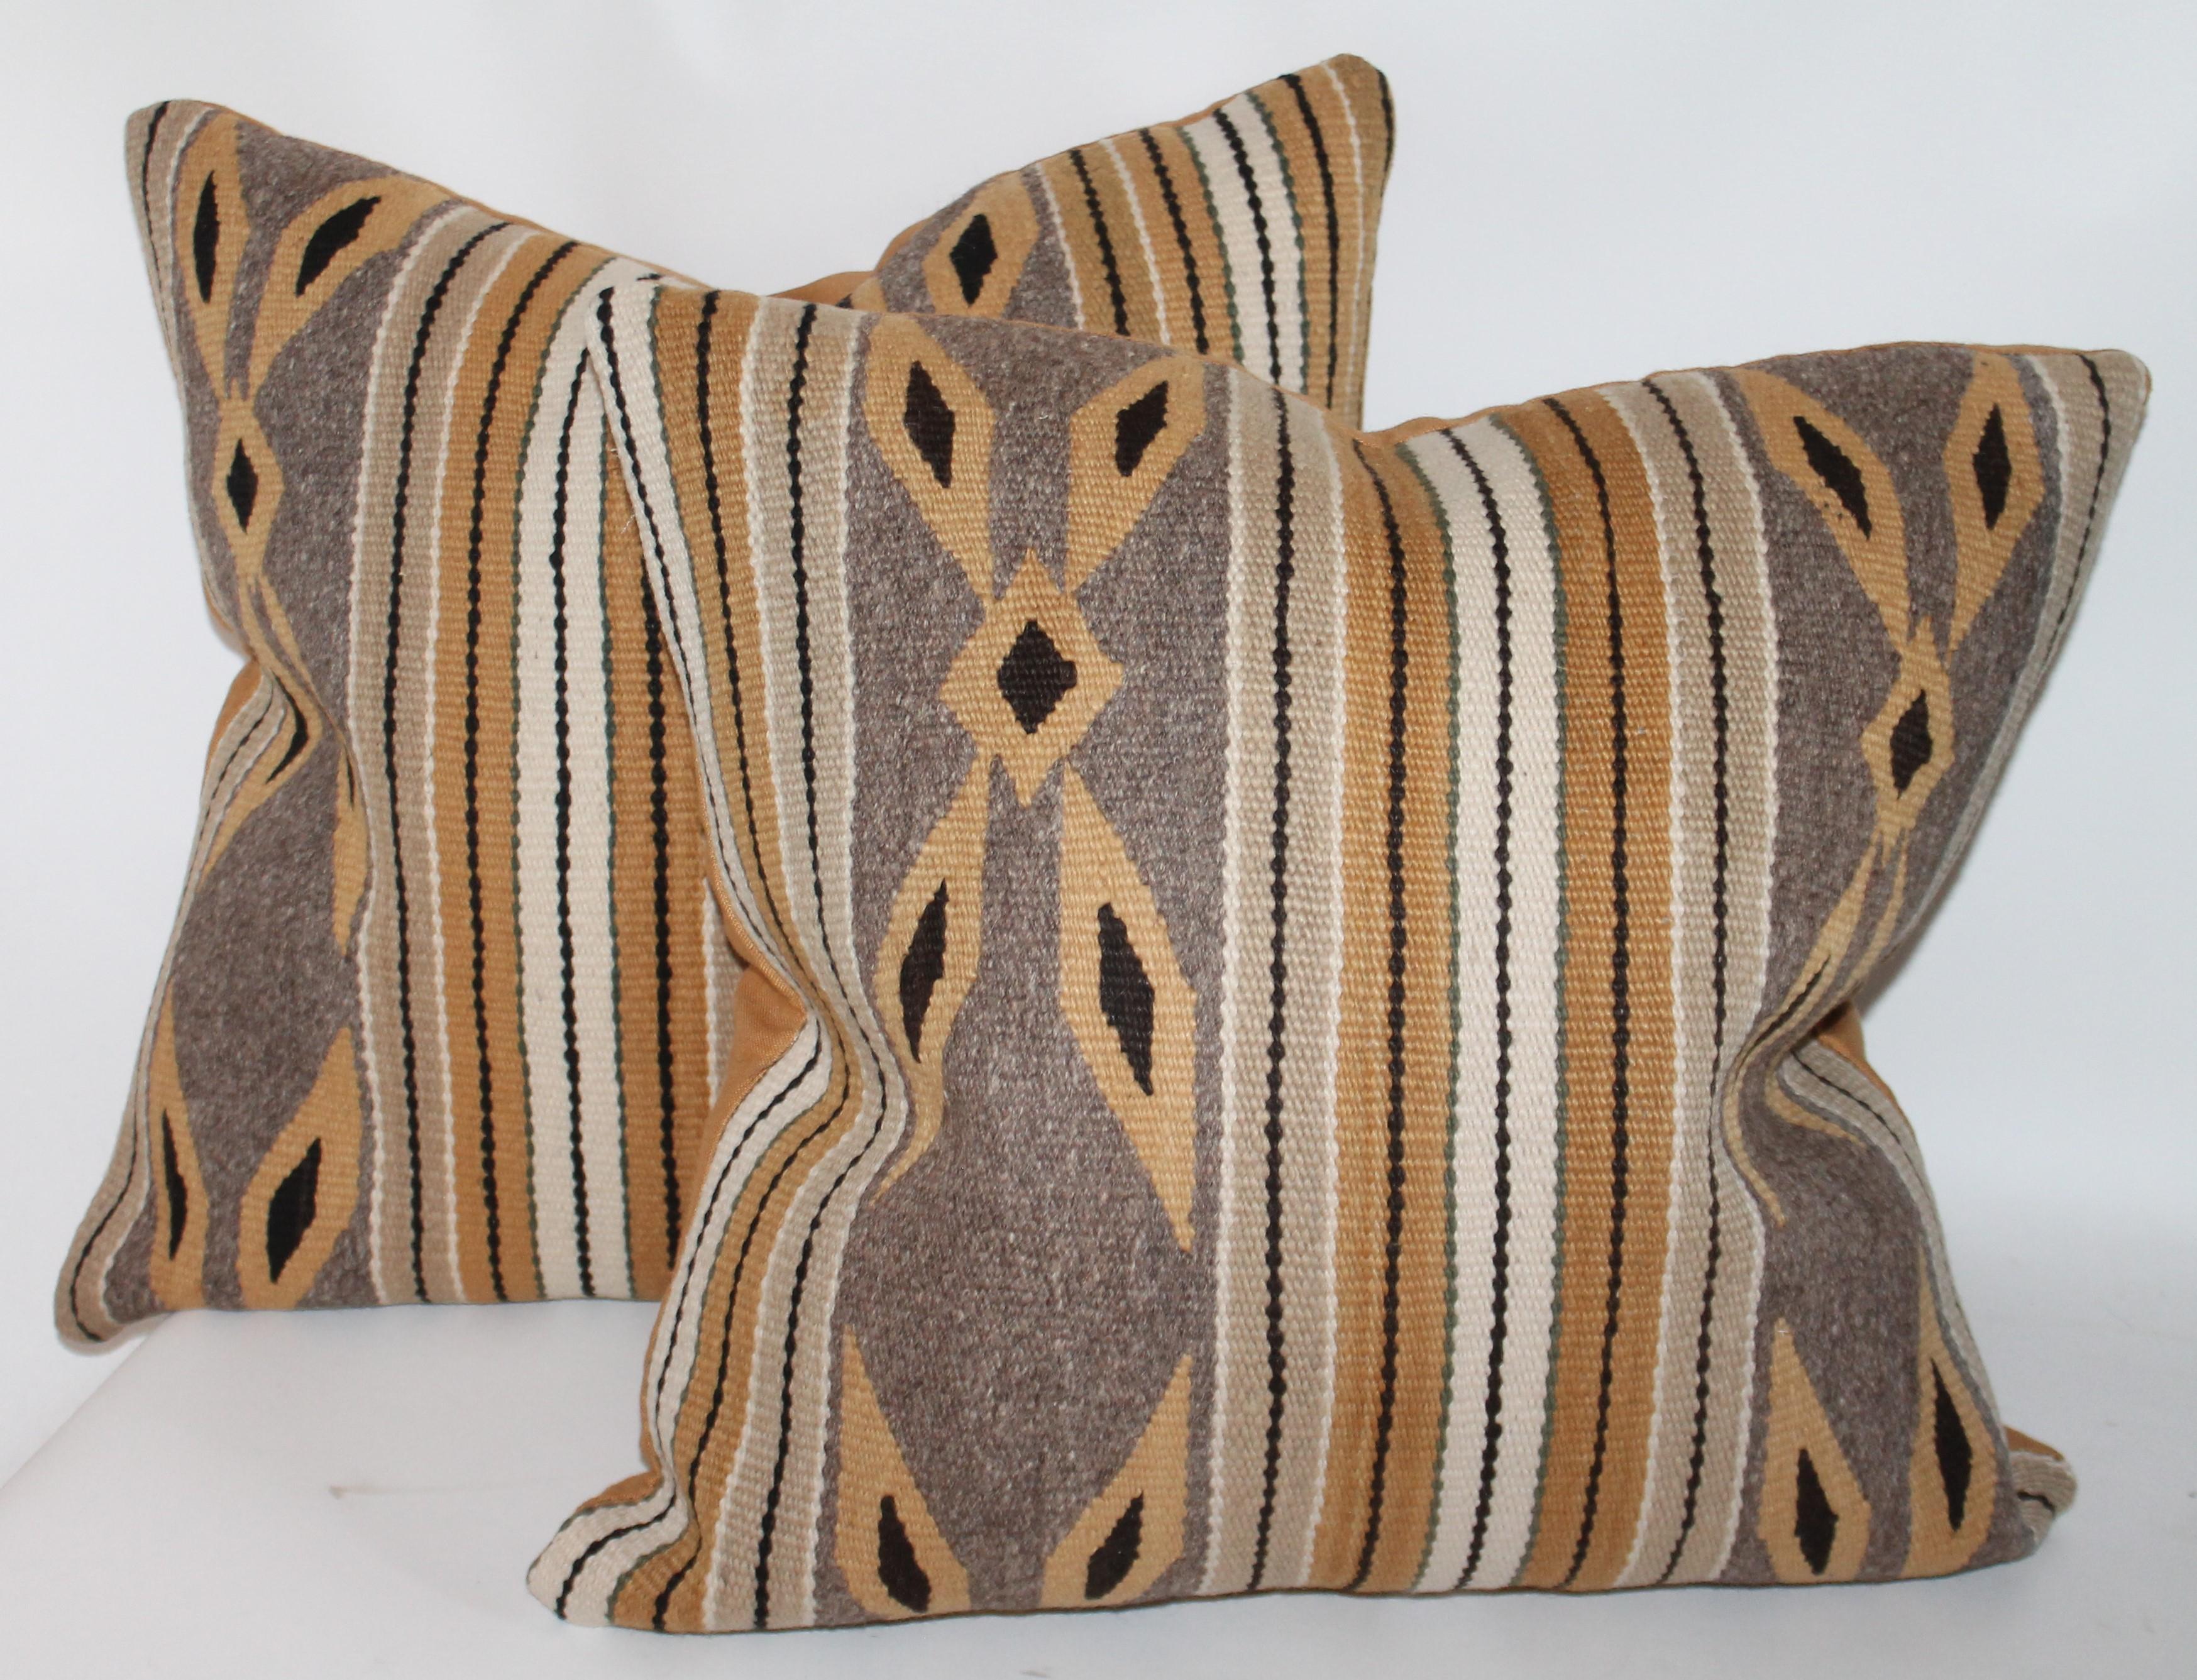 These fine Navajo Indian weaving pillows are sold as pairs. There are two pairs in stock. They are in fantastic condition.